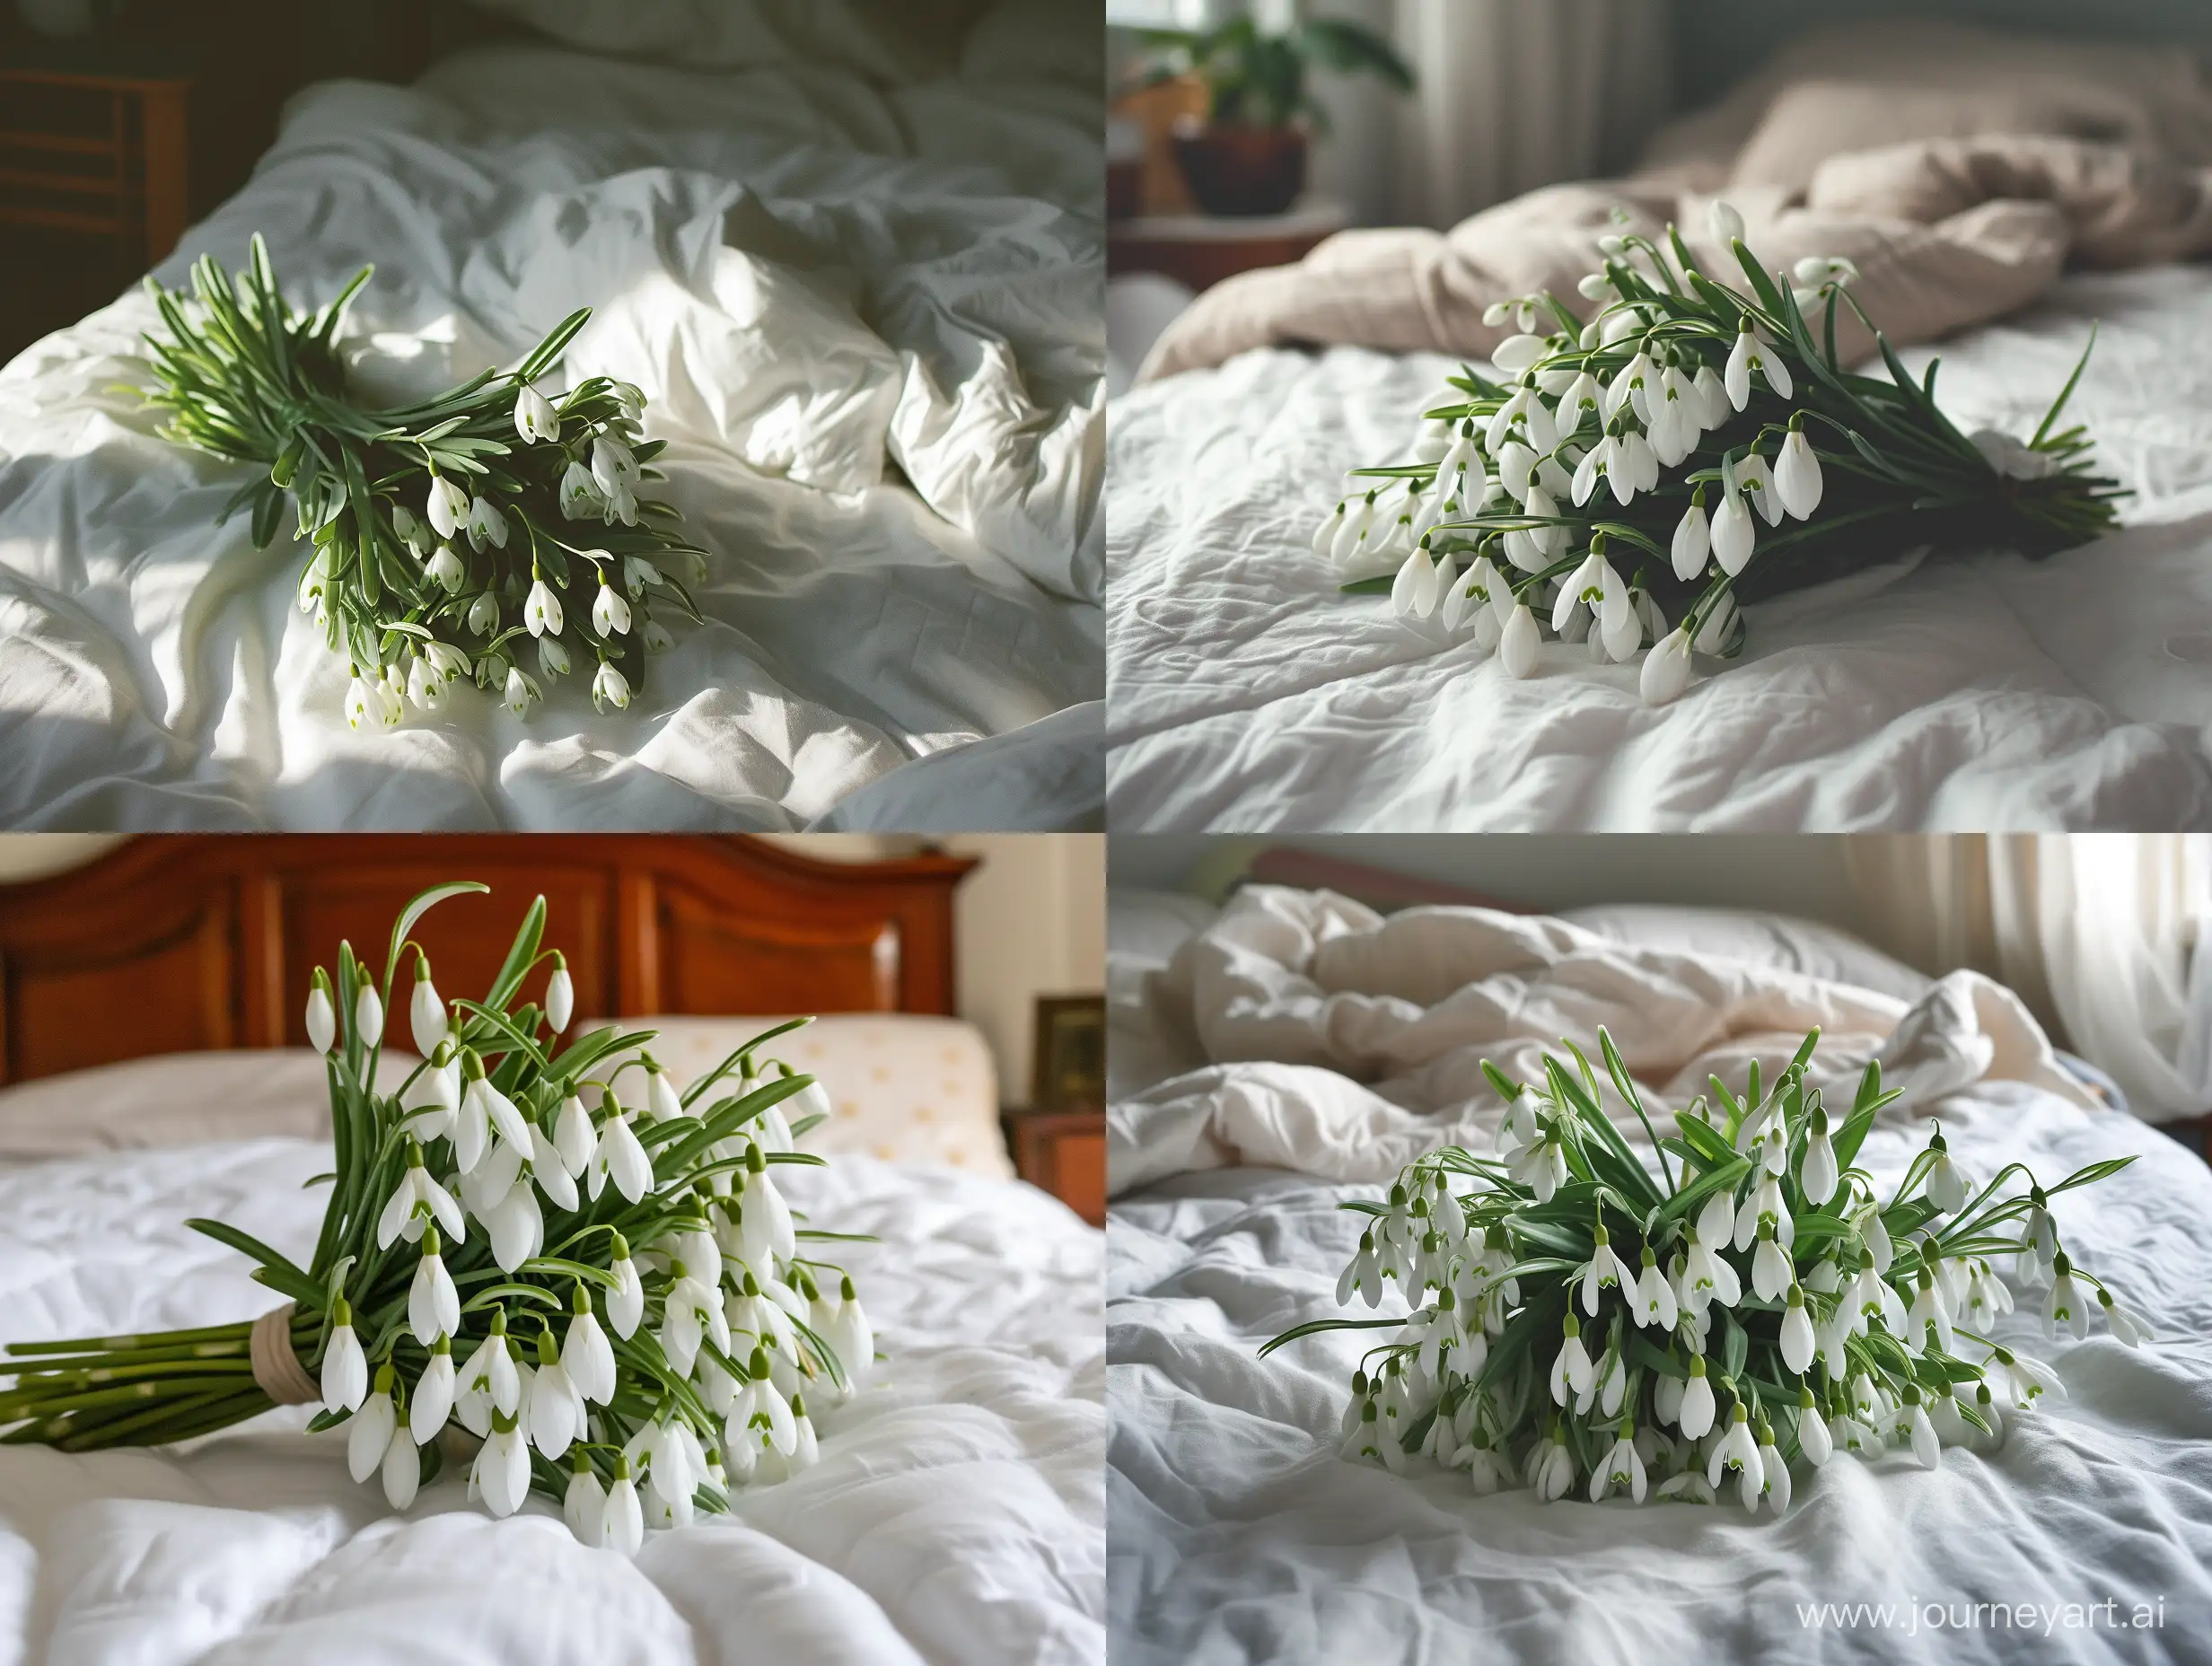 a bouquet of snowdrops on the bed